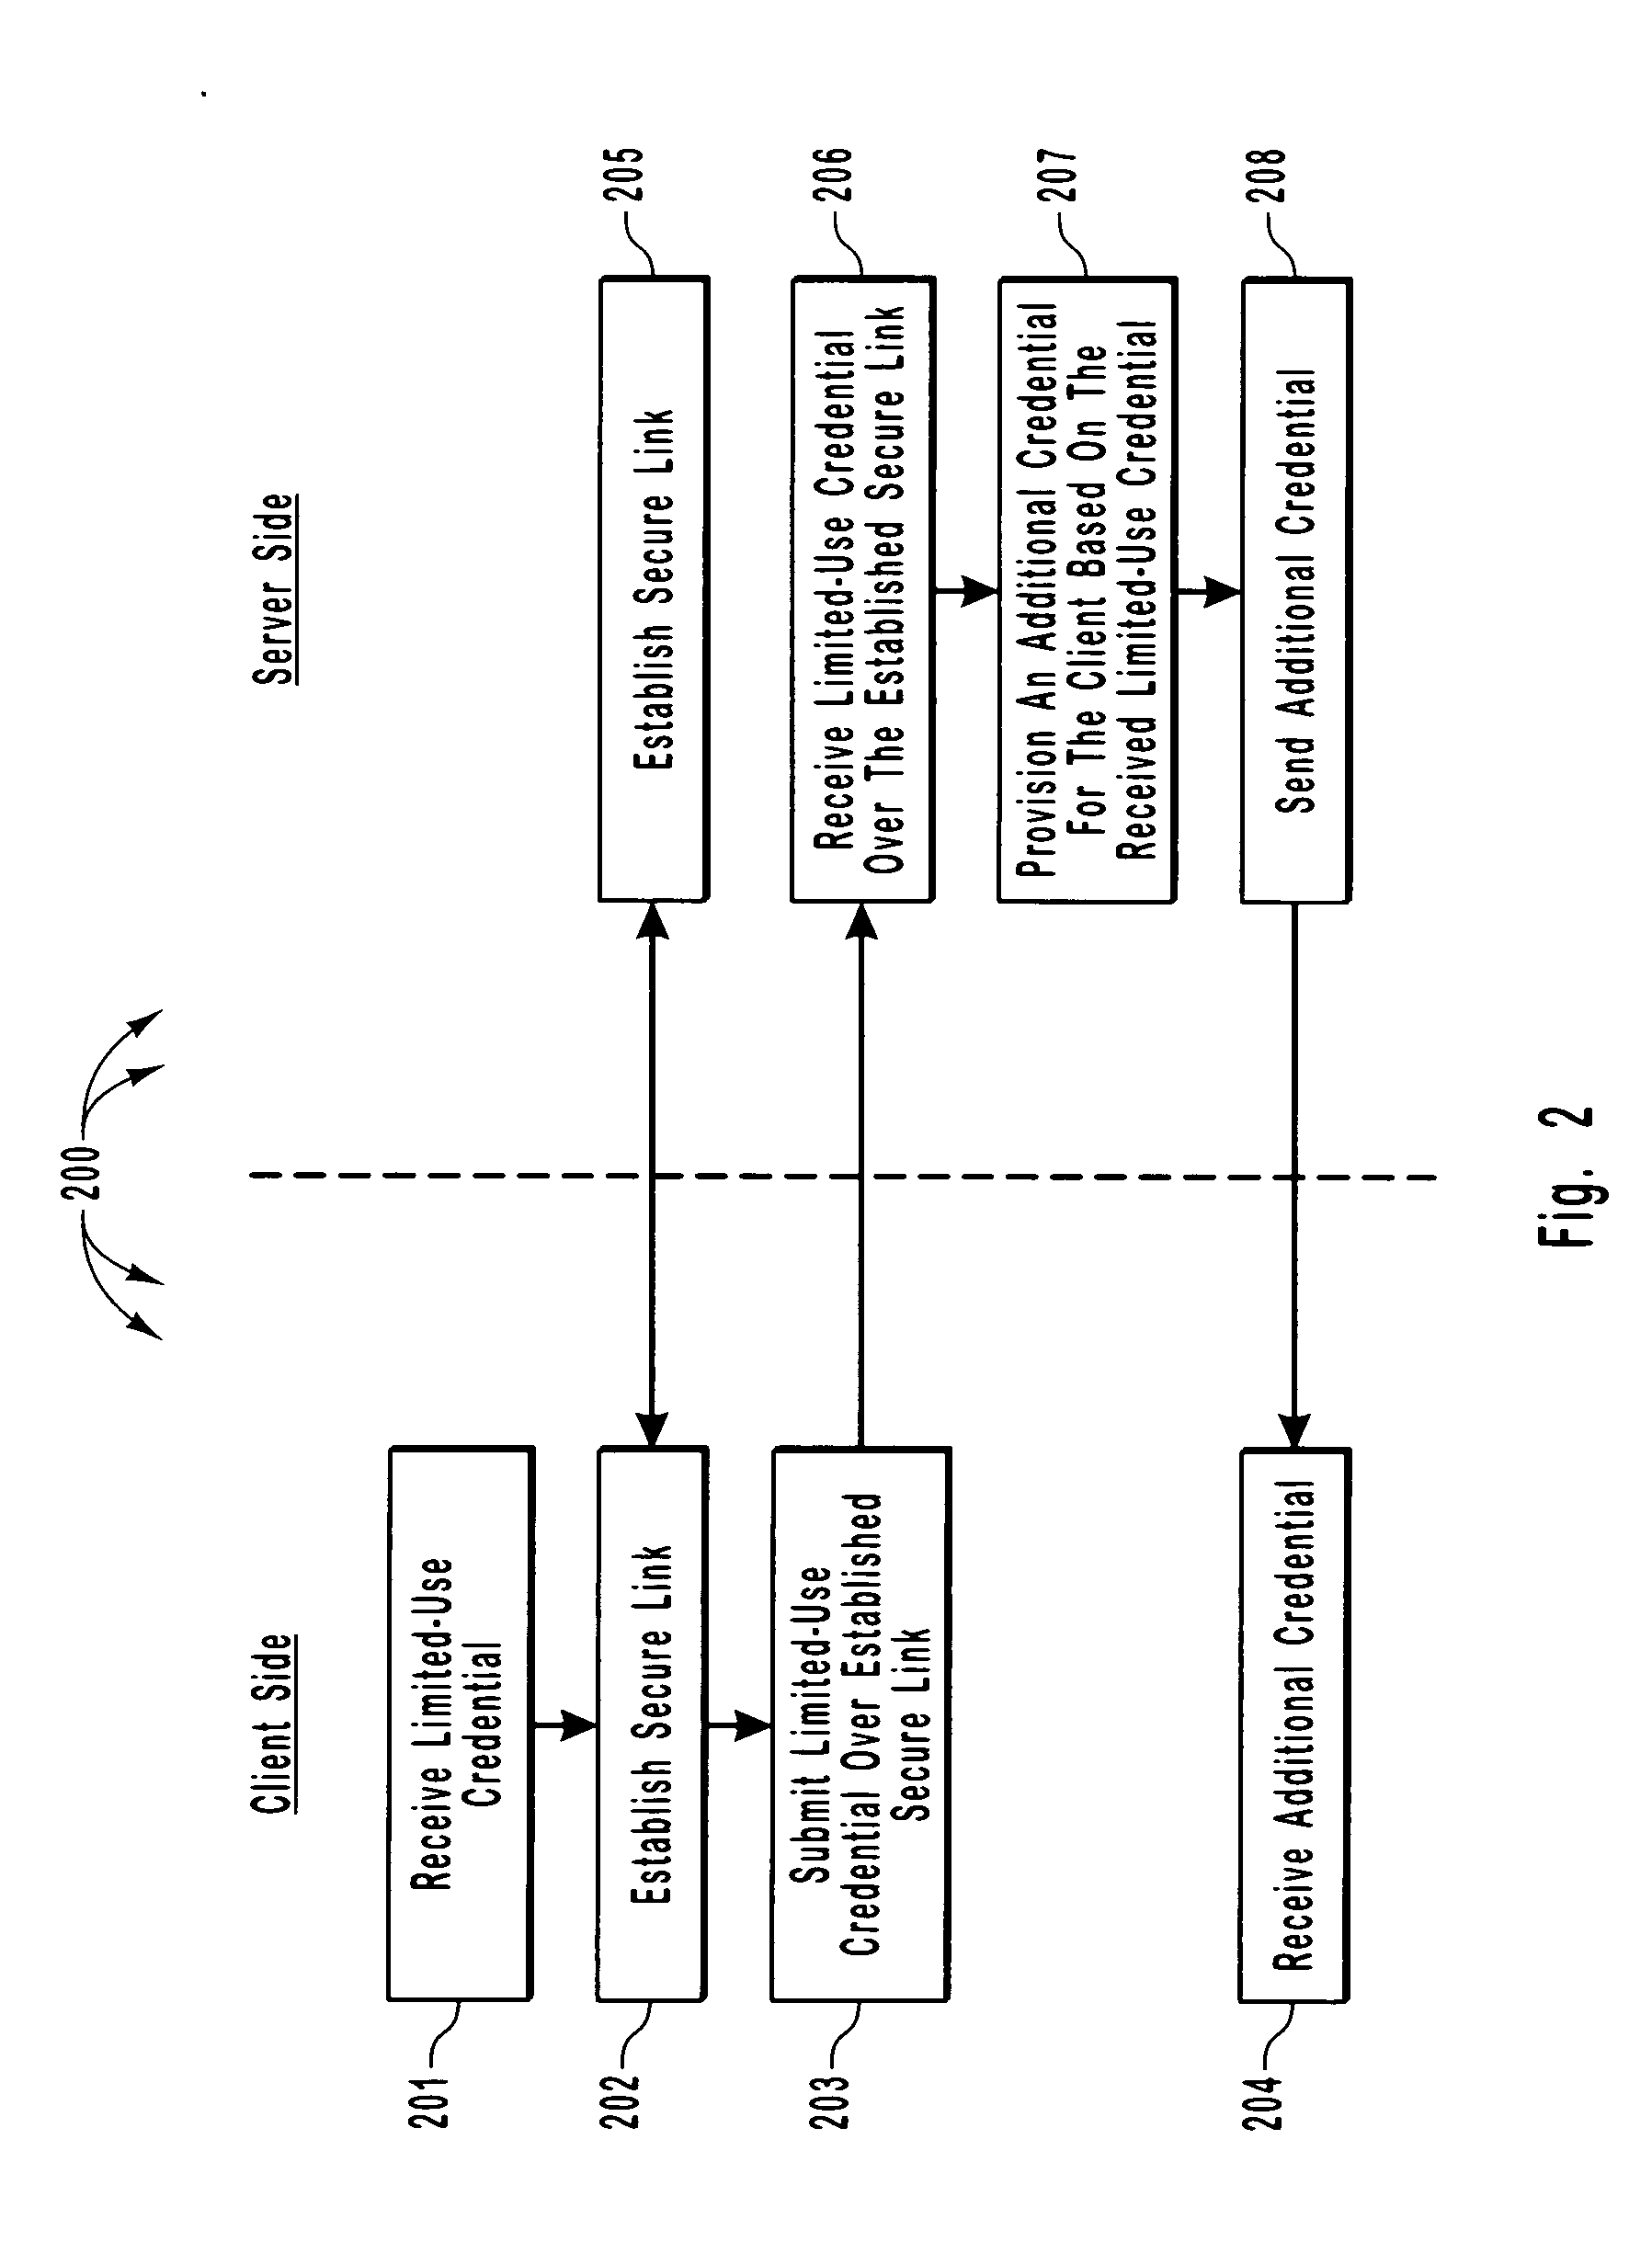 Efficient and secure authentication of computing systems